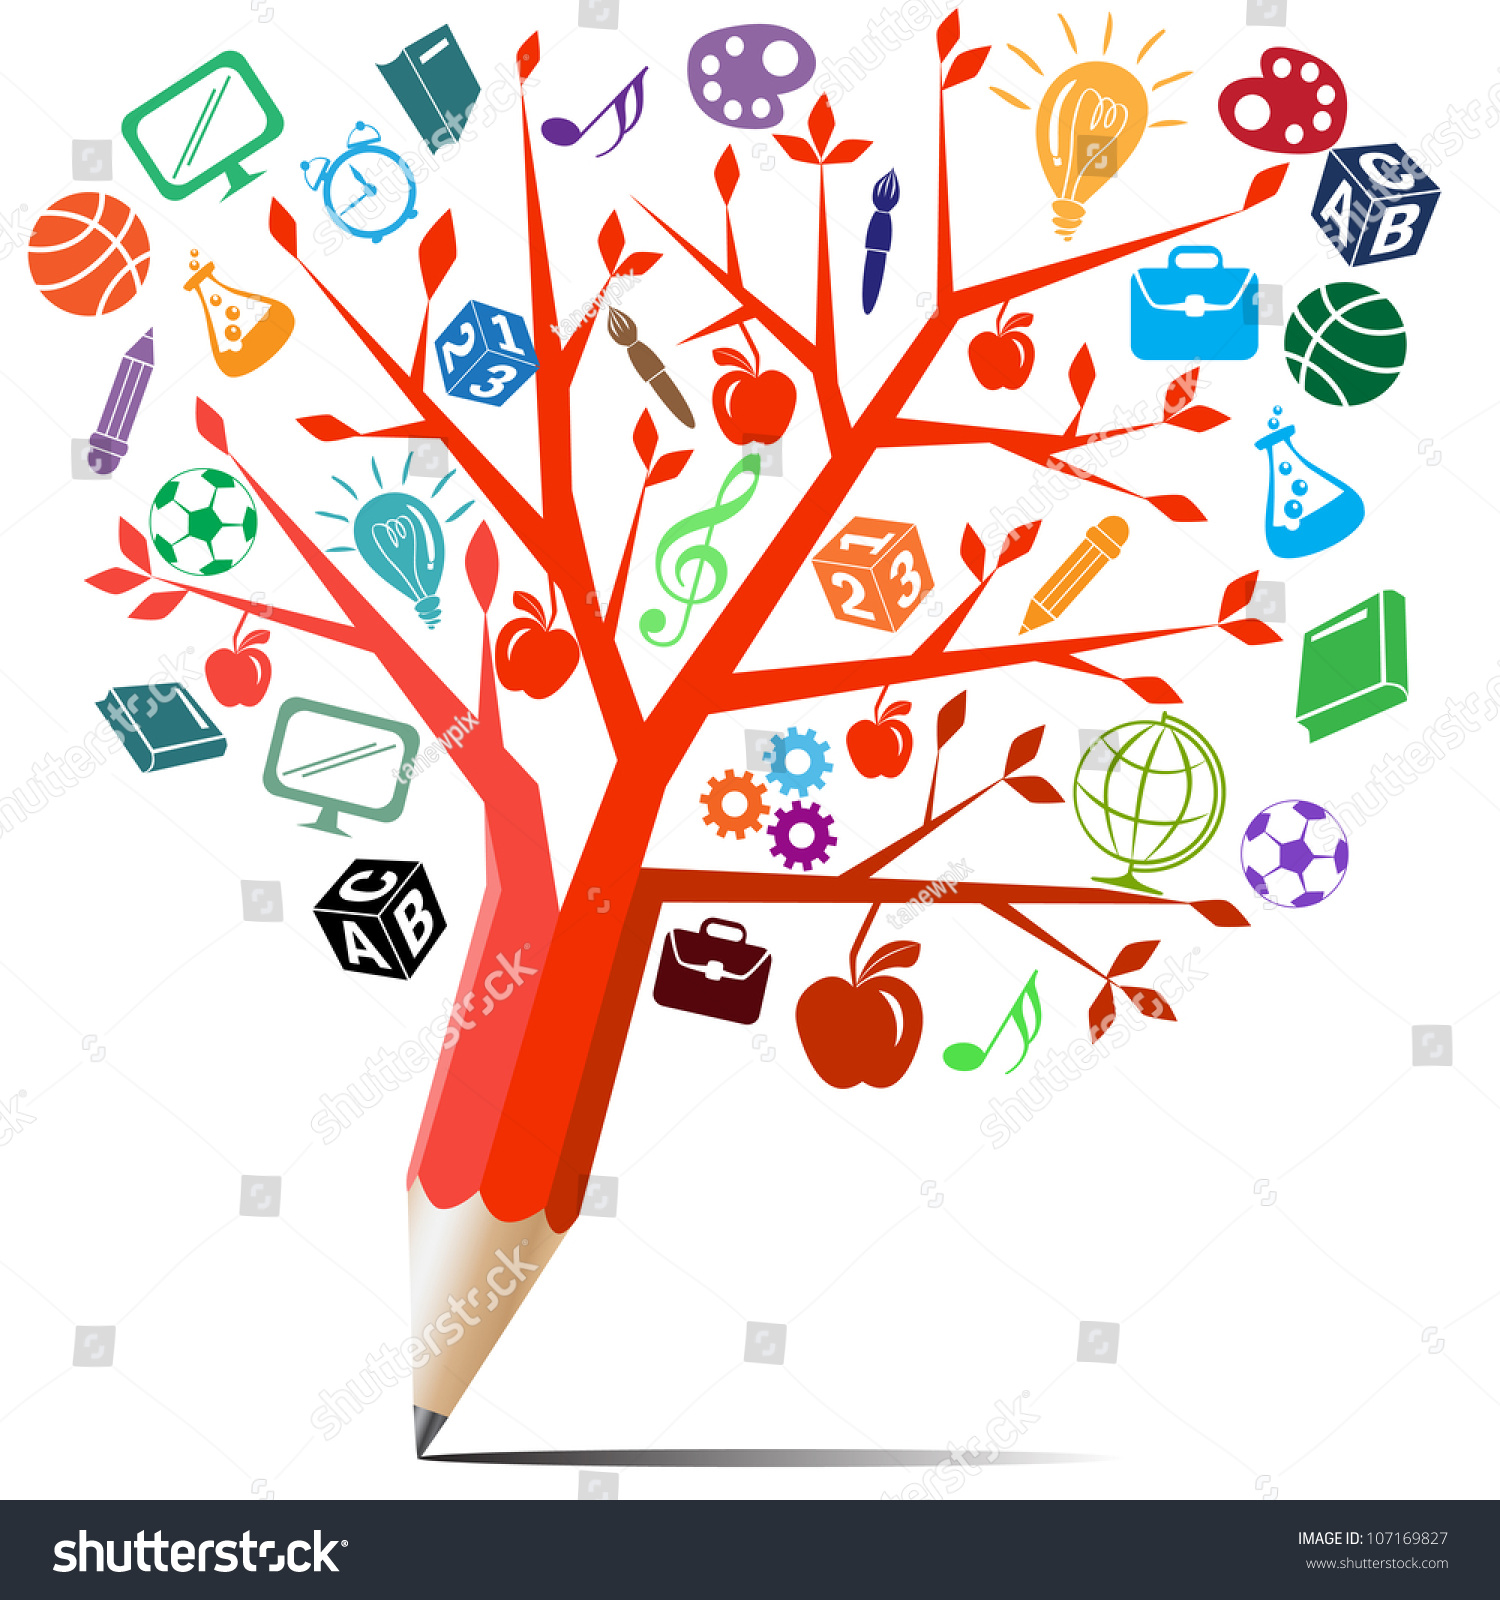 apple back to school clipart - photo #44